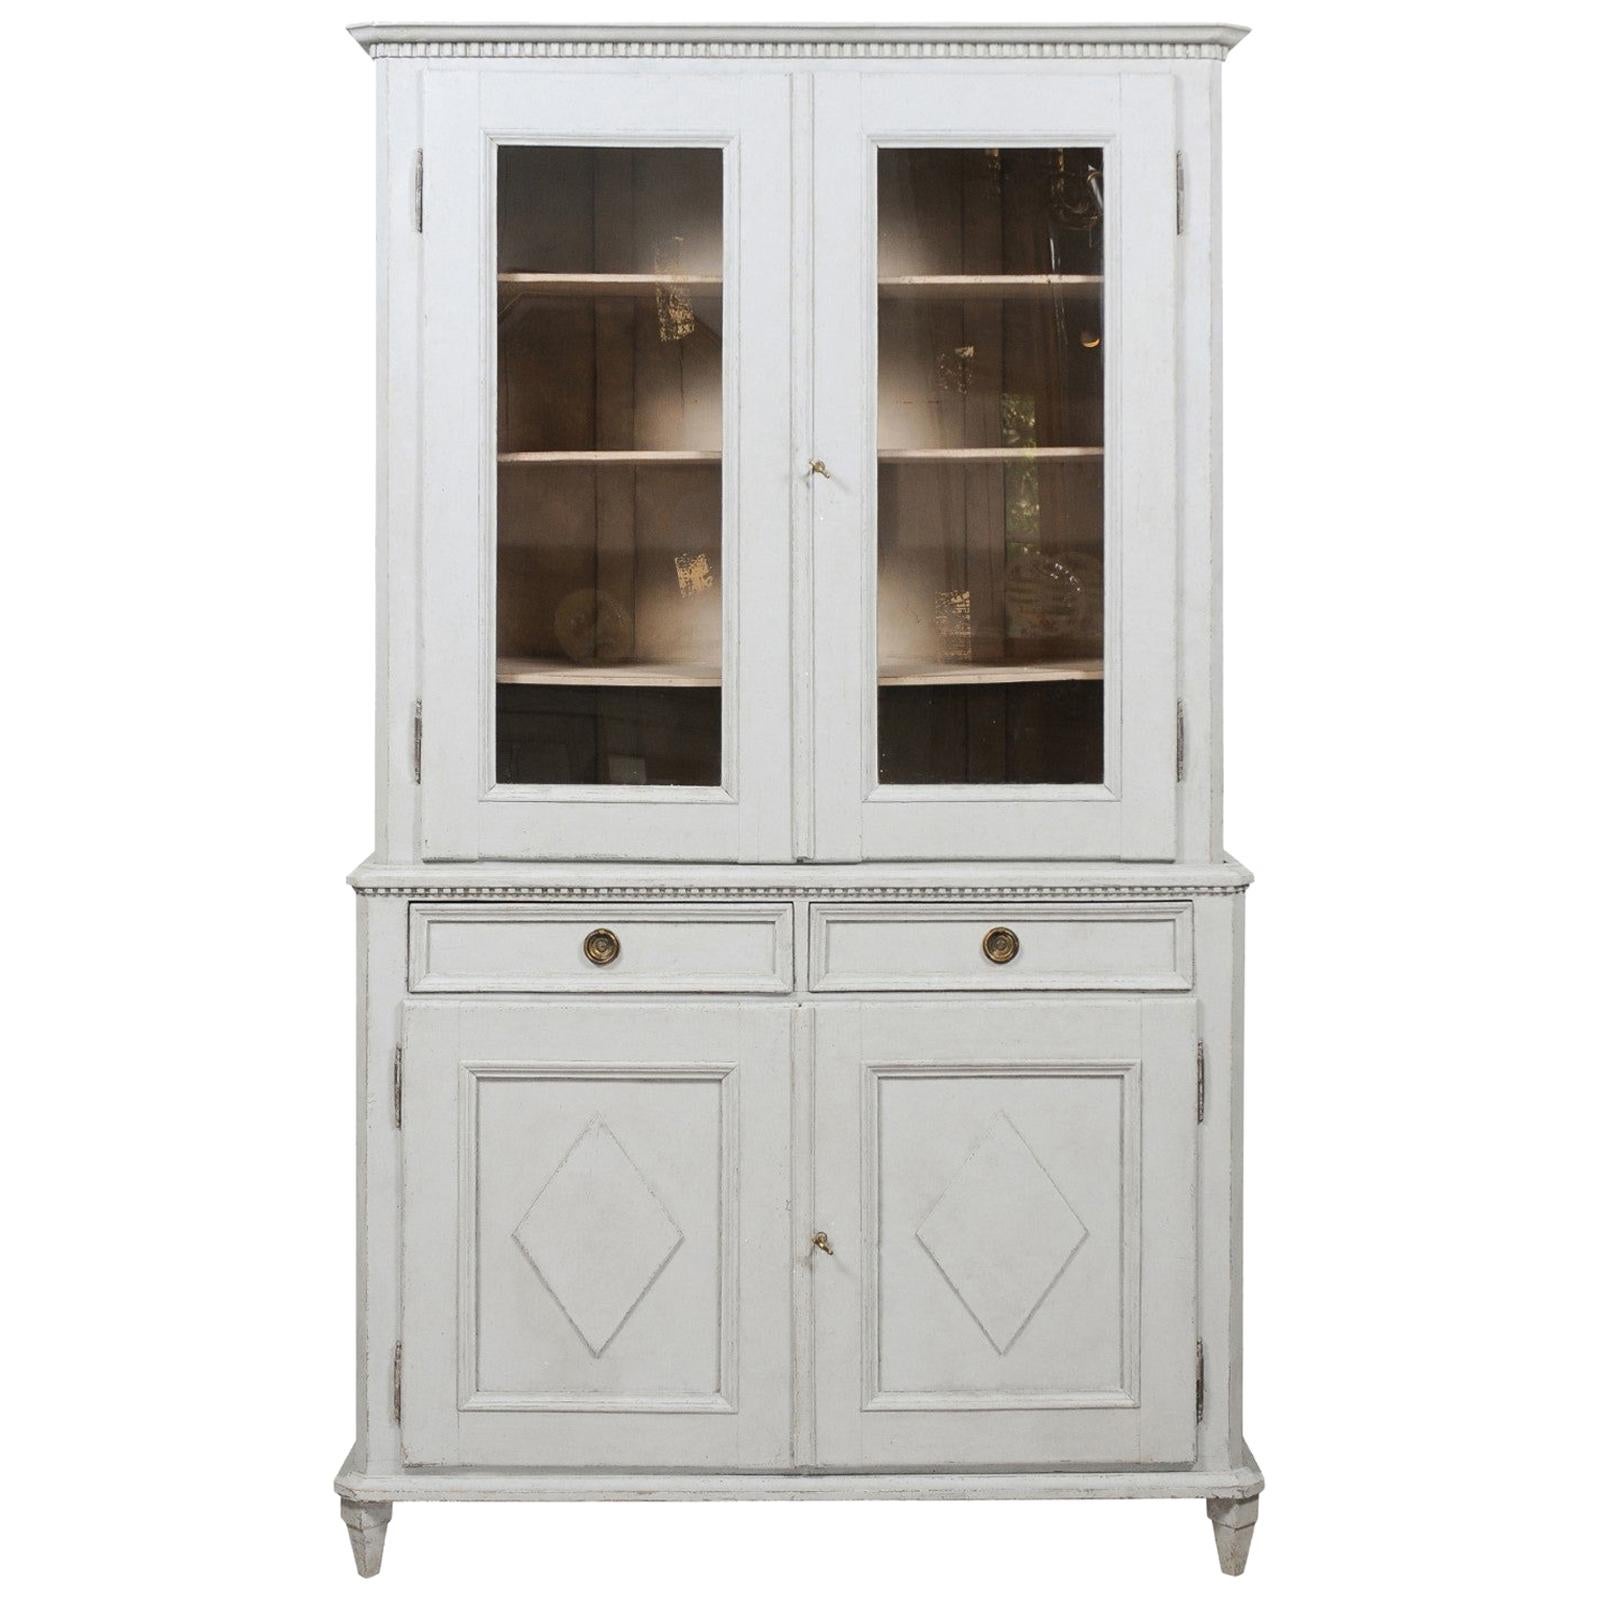 Swedish Gustavian Style 19th Century Painted Cabinet with Glass Doors